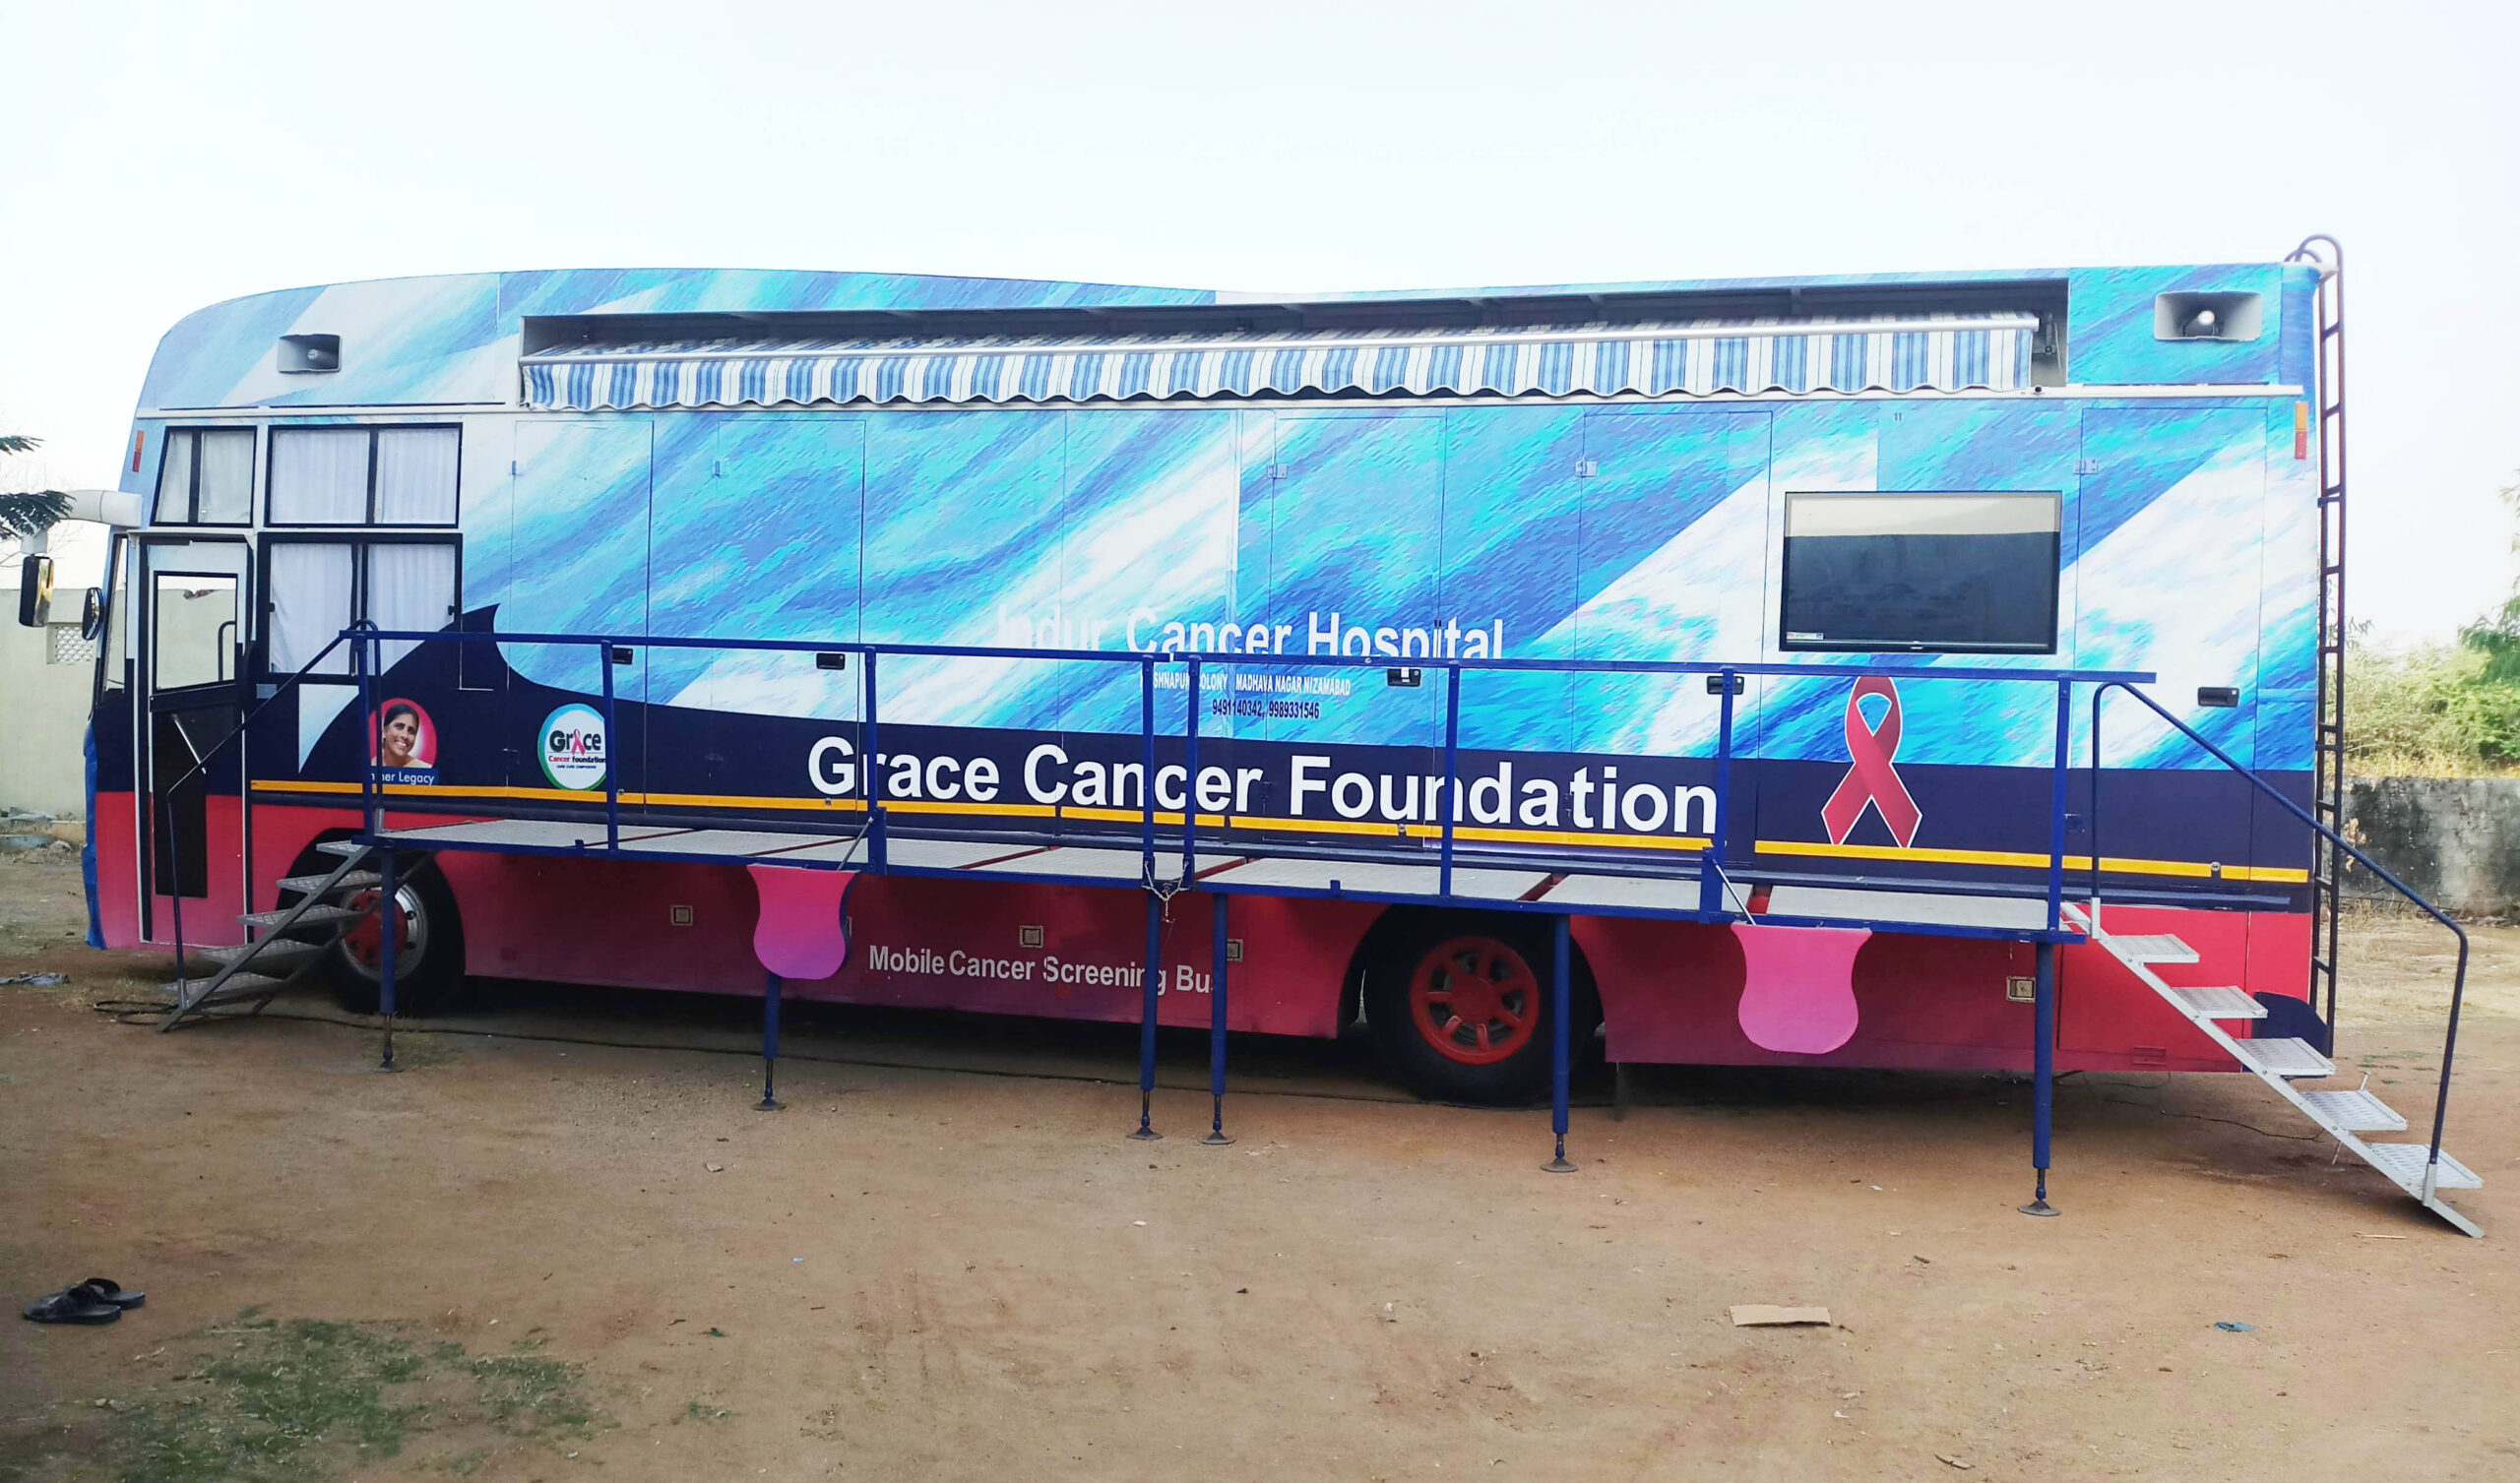 Grace Cancer Foundation & Indur Cancer Hospital, along with Govt. of Telangana, to screen the Nizamabad population for Cancer!